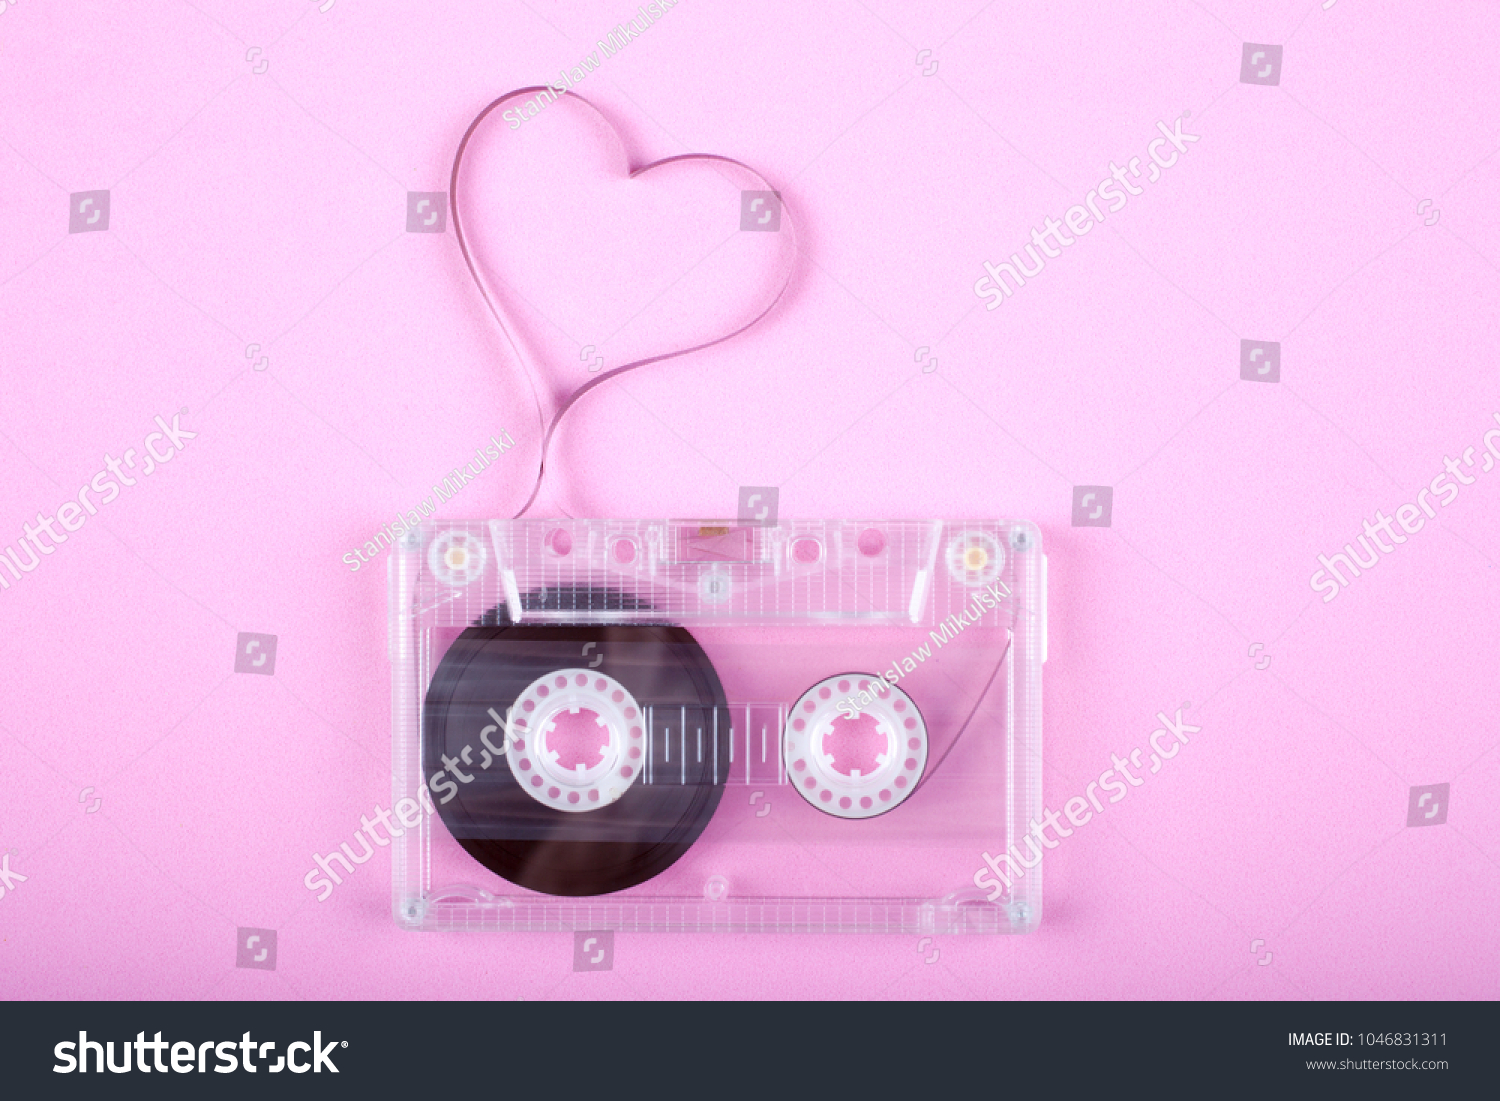 Film in a shape of heart from Compact Cassette. Love for music and songs. Pink background. #1046831311